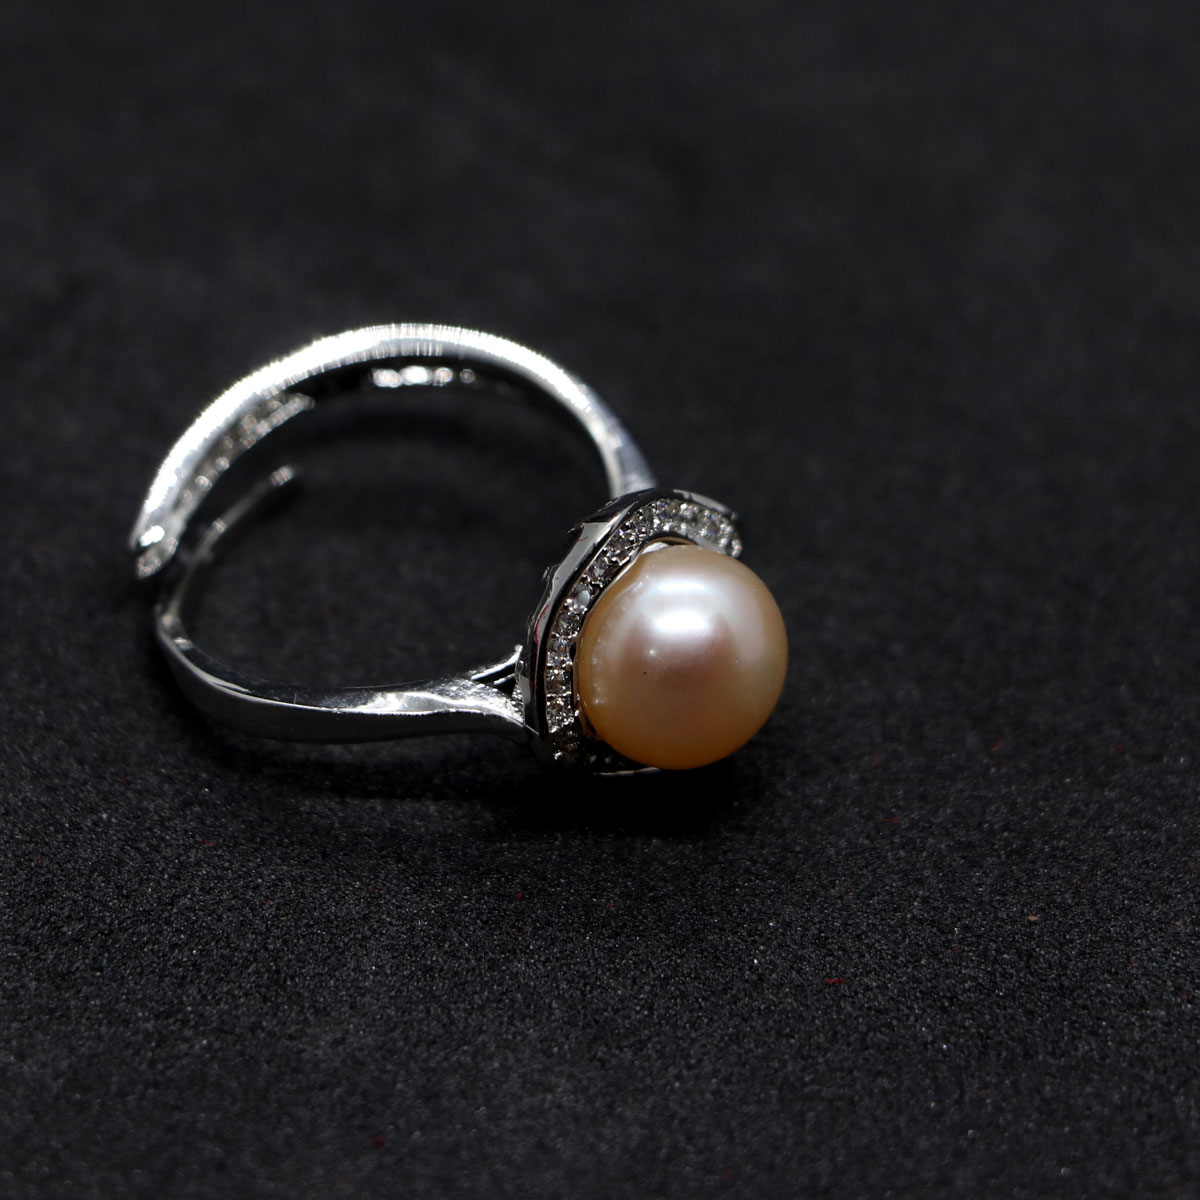 Pearl benefit - Benefits of wearing pearl according to Vedic astrology